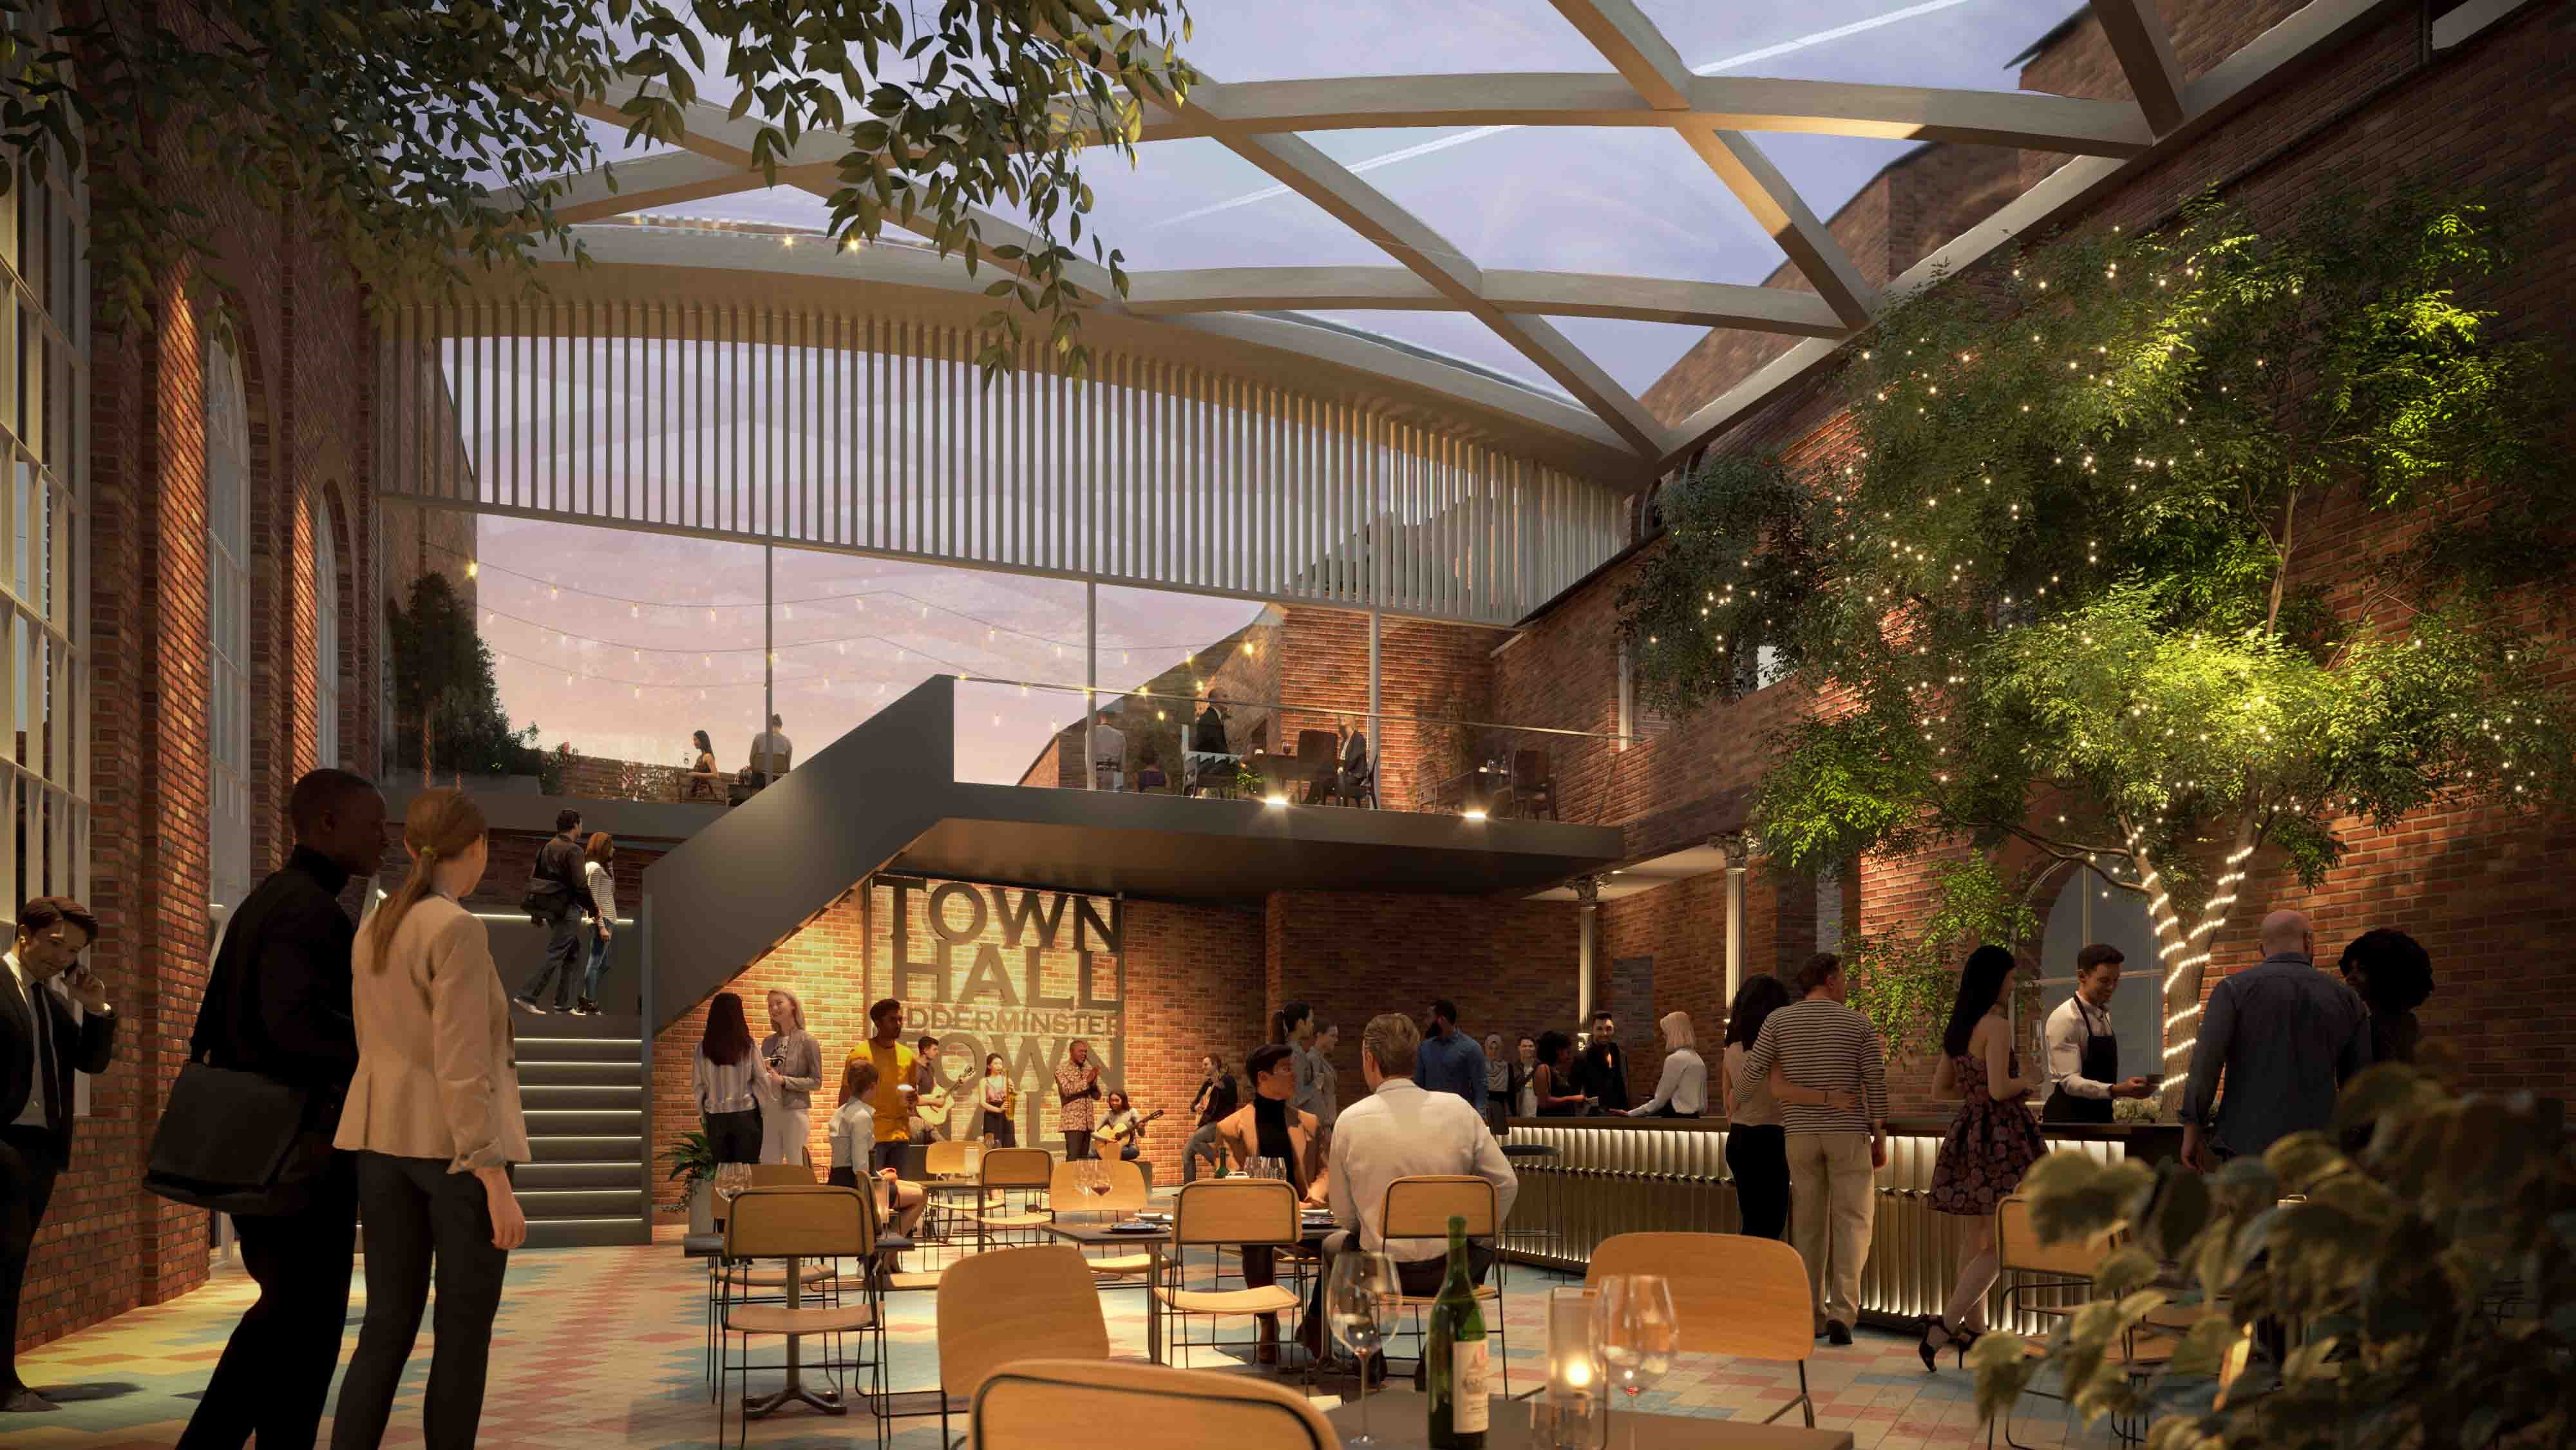 Image shows CGI artist's impression of an indoor courtyard with people at tables and a glass ceiling